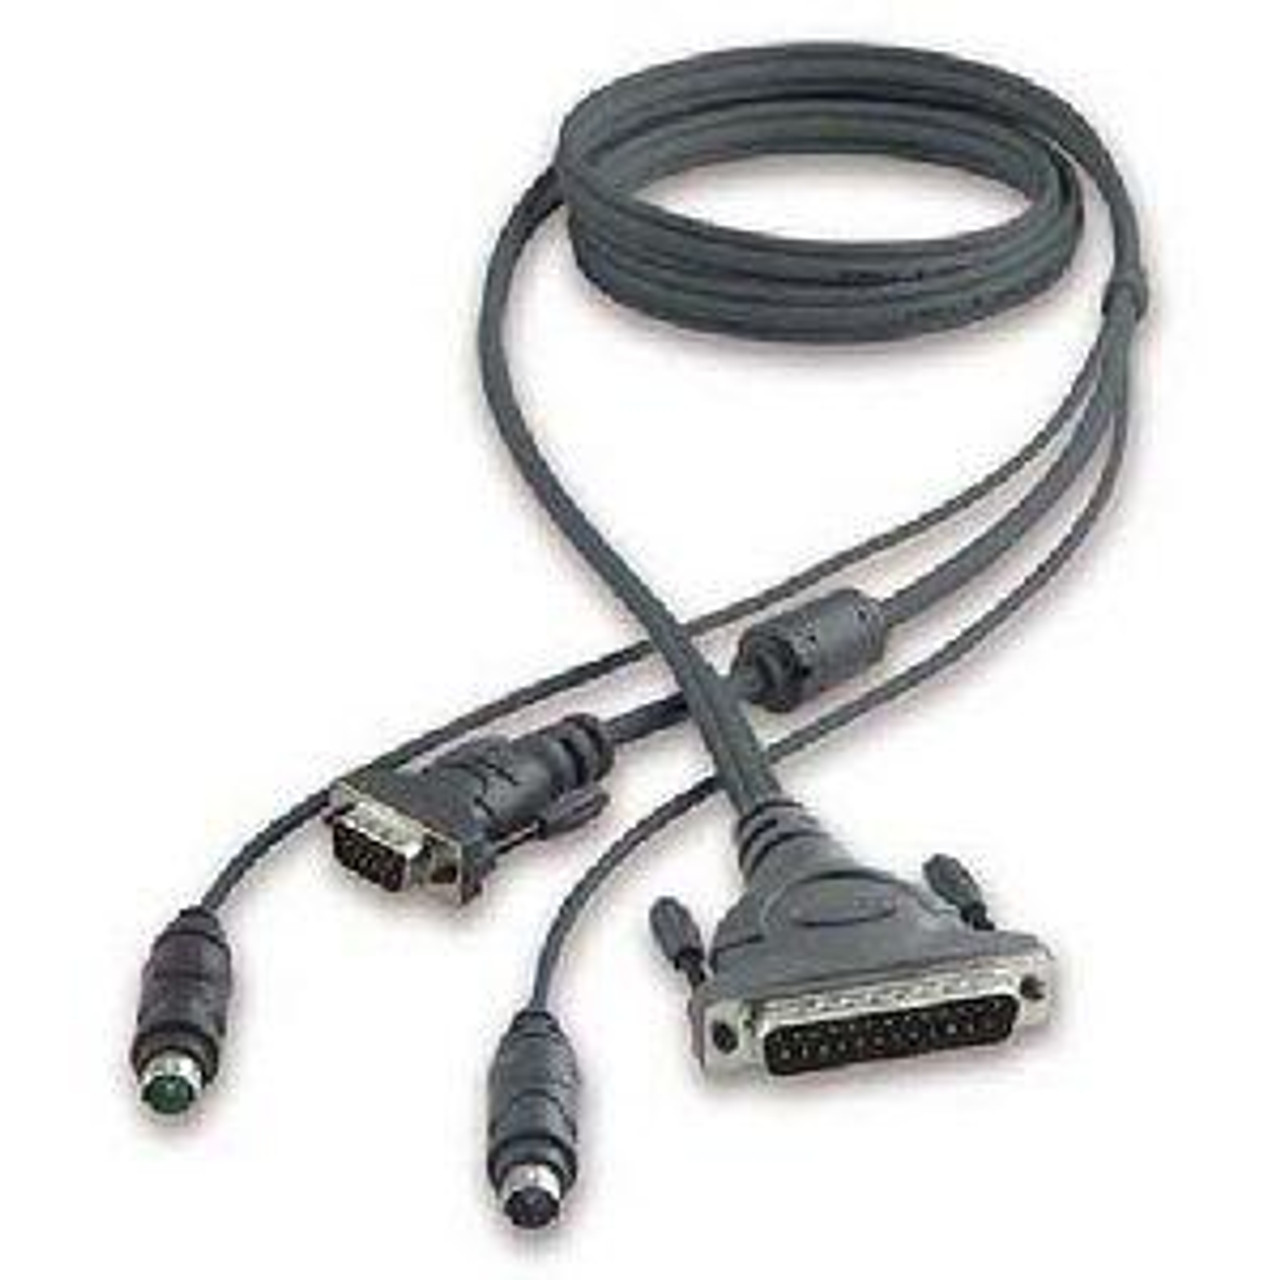 F1D9101v10 BELKIN OMNIVIEW KVM CABLES FOR SOHO SERIES WITH AUDIO 